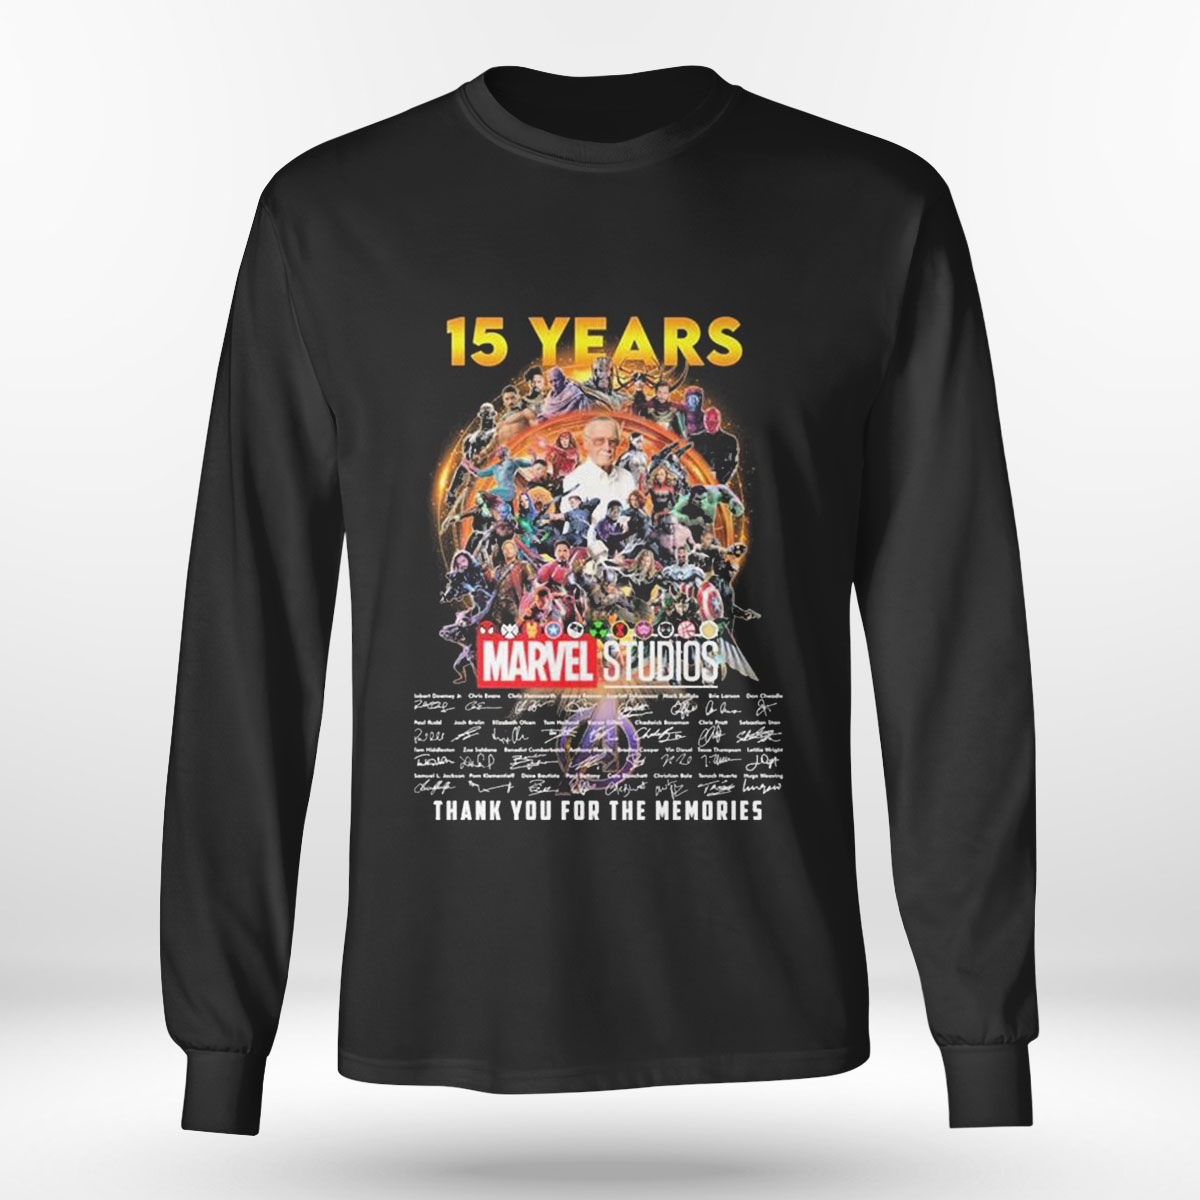 15 Years Marvel Studios Signature Thank You For The Memories T-shirt